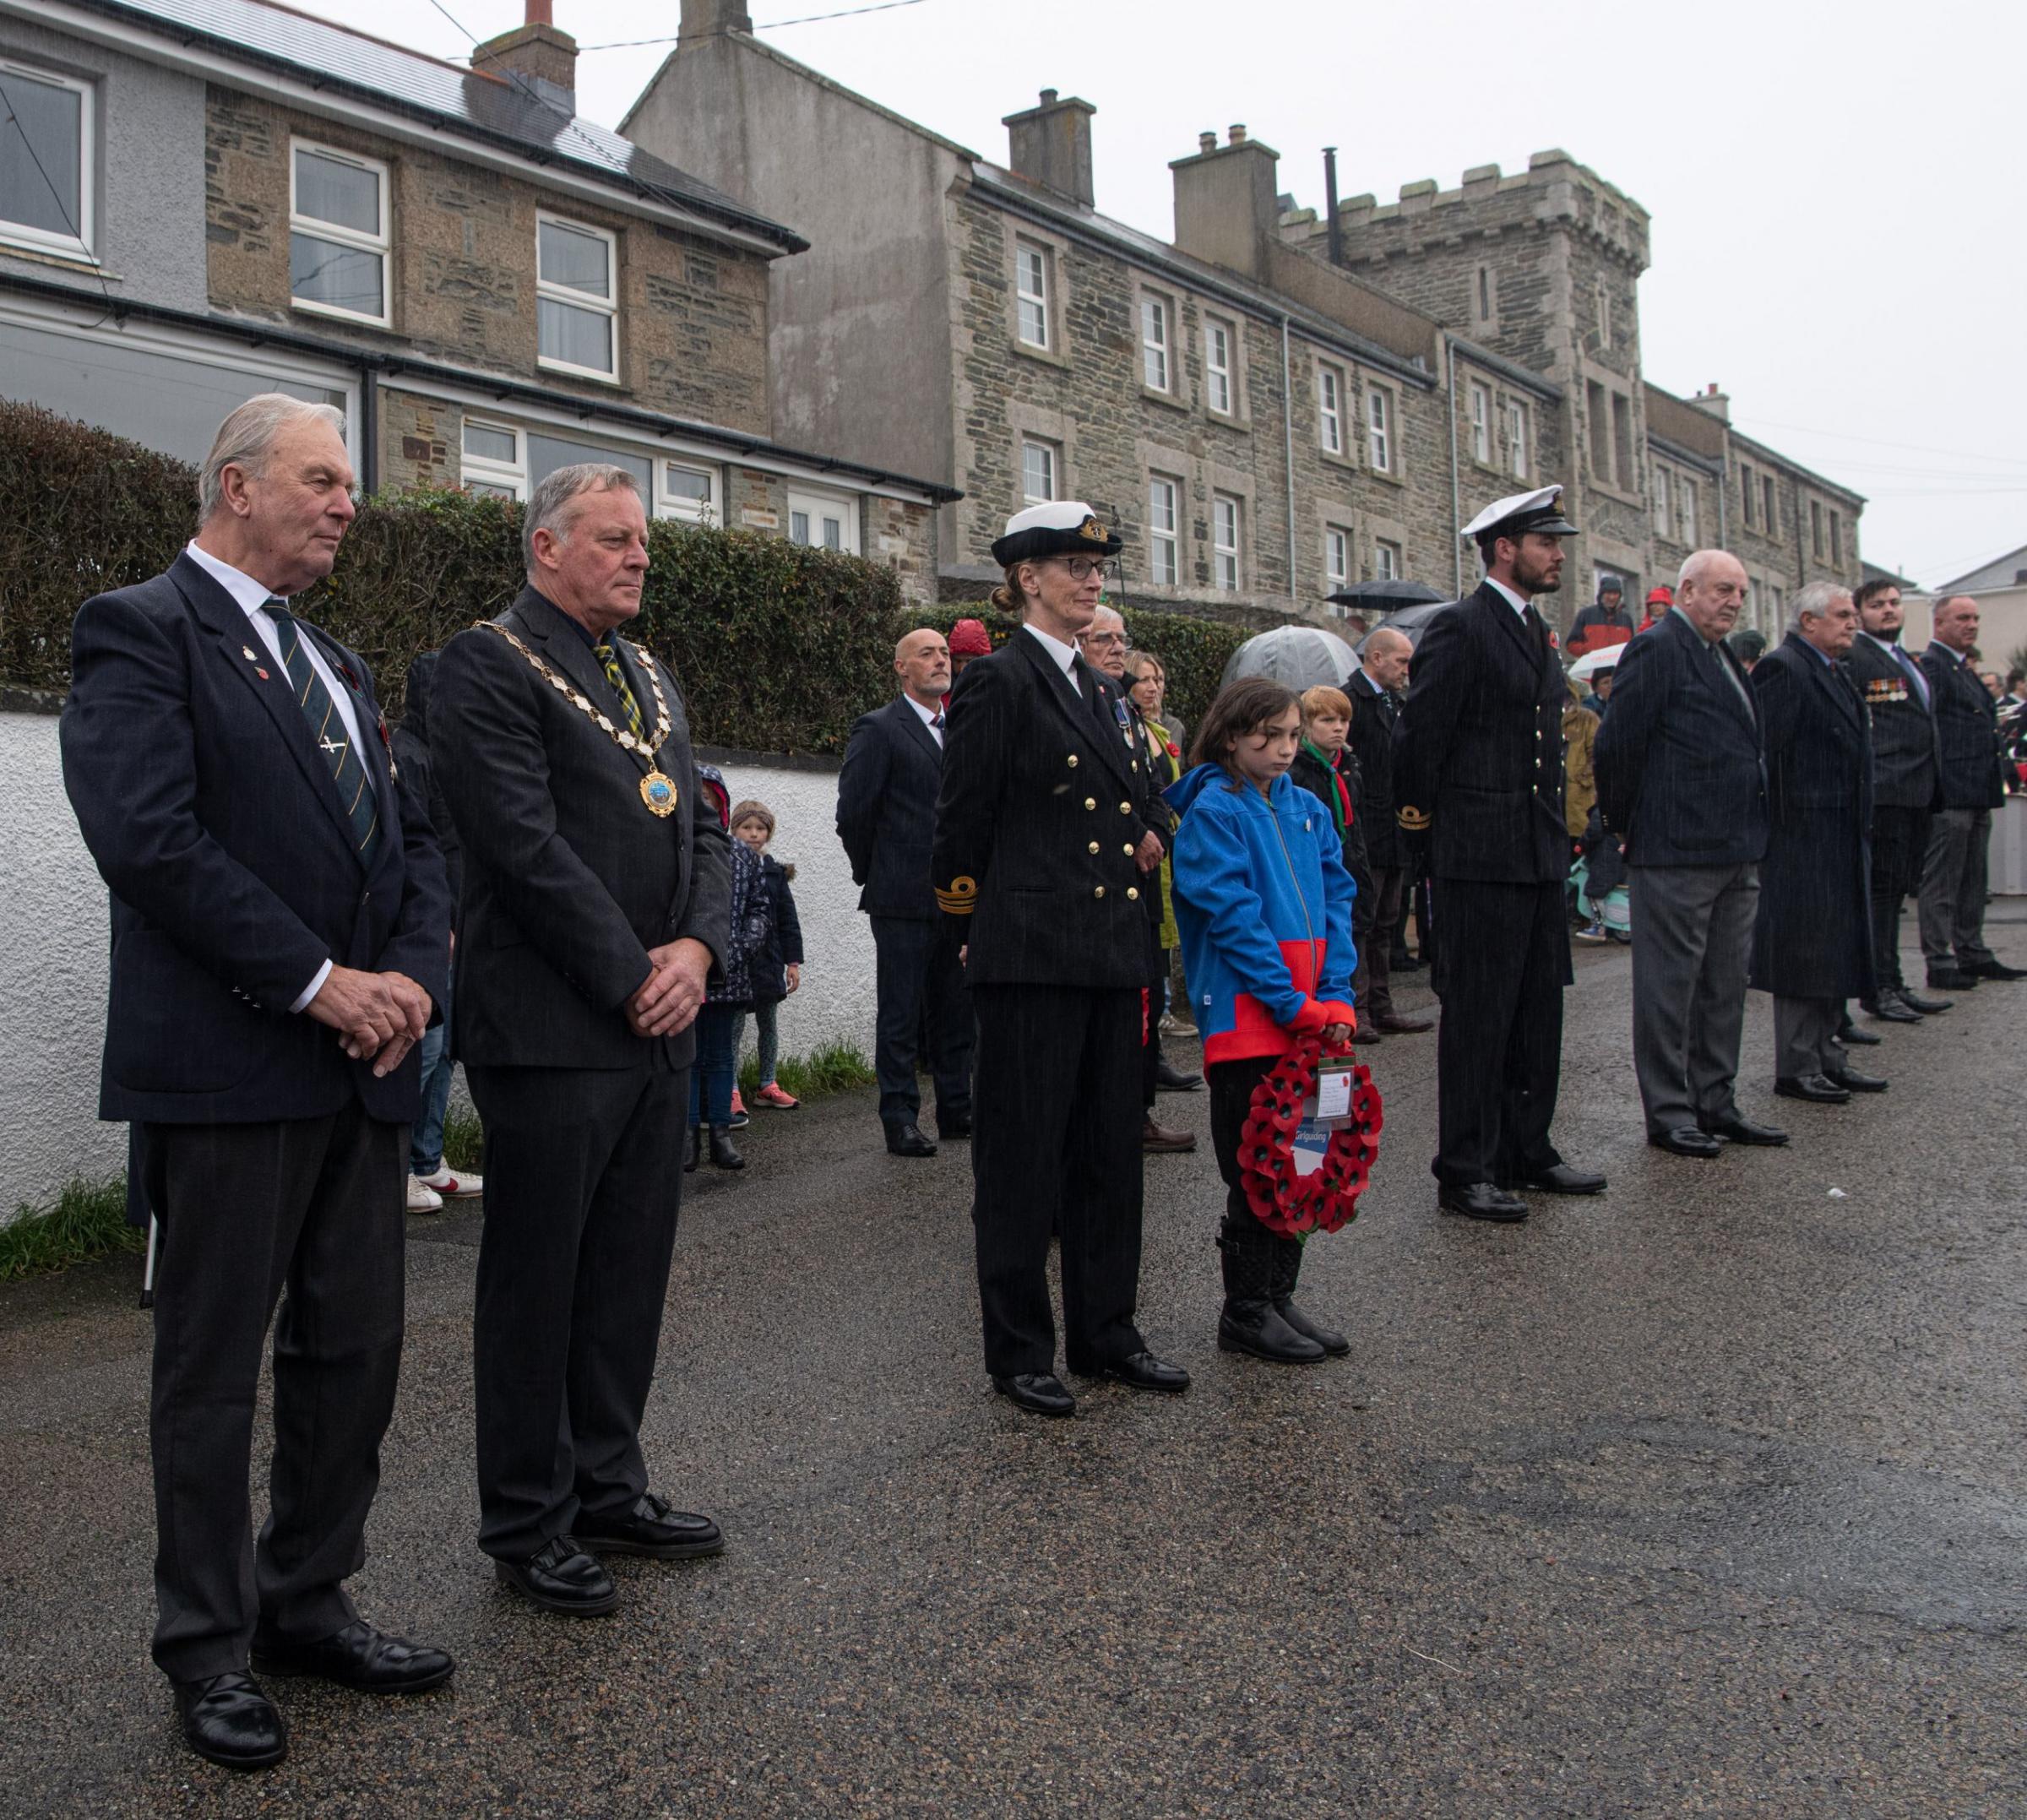 Wreaths were laid on behalf of many organisations in Porthleven Picture: Kathy White